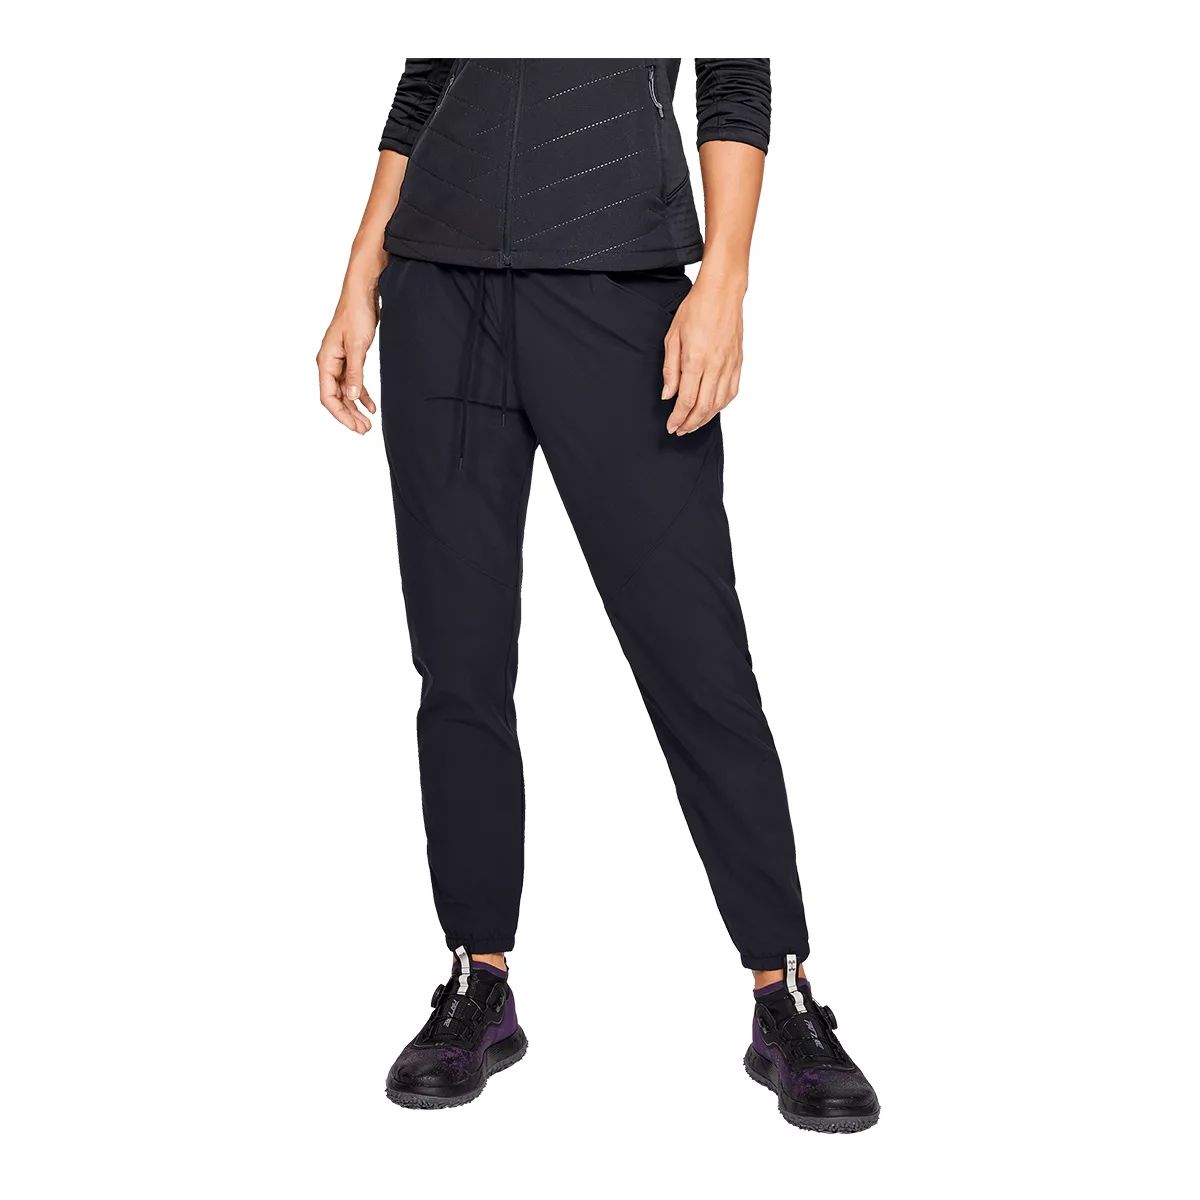 Under Armour Women's Fusion Pants, Hiking, Outdoor, Loose Fit, Tapered,  Lightweight